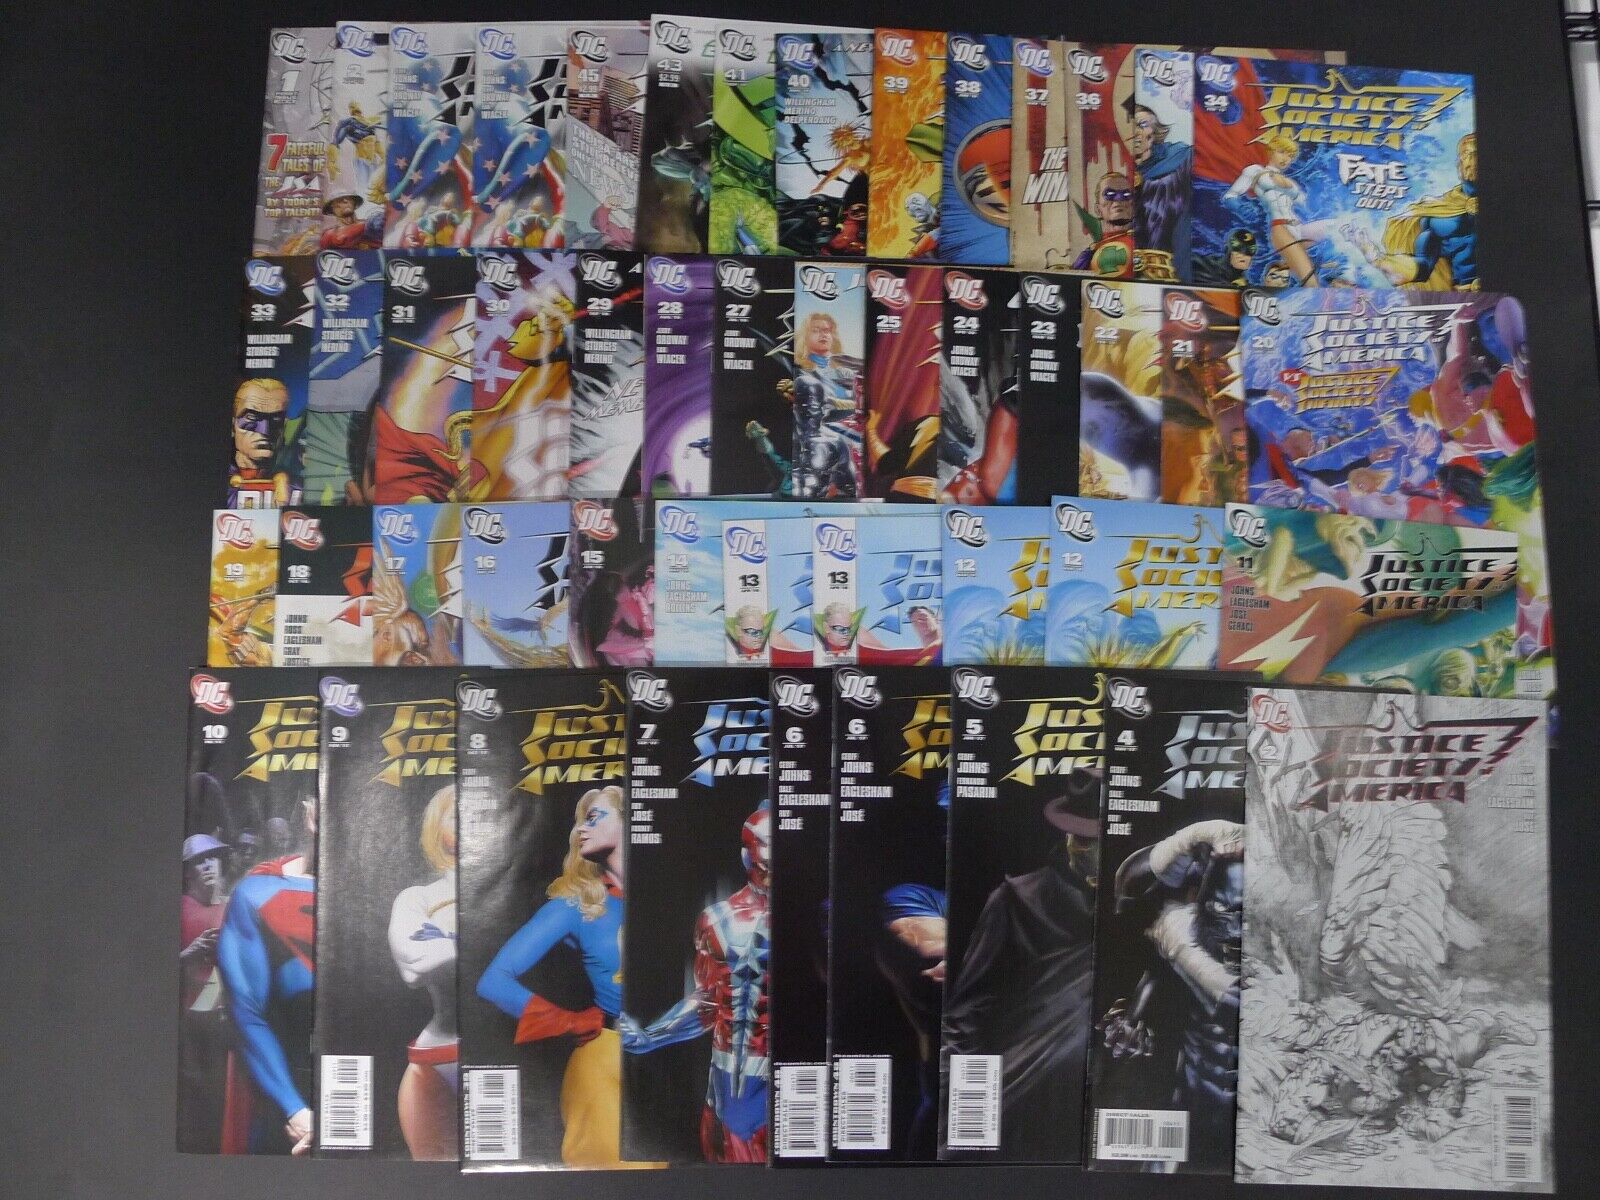 JUSTICE SOCIETY OF AMERICA COMICS: 2, 4-41, 43, 45, Ann 1 2, 80pg - LOT OF (48)